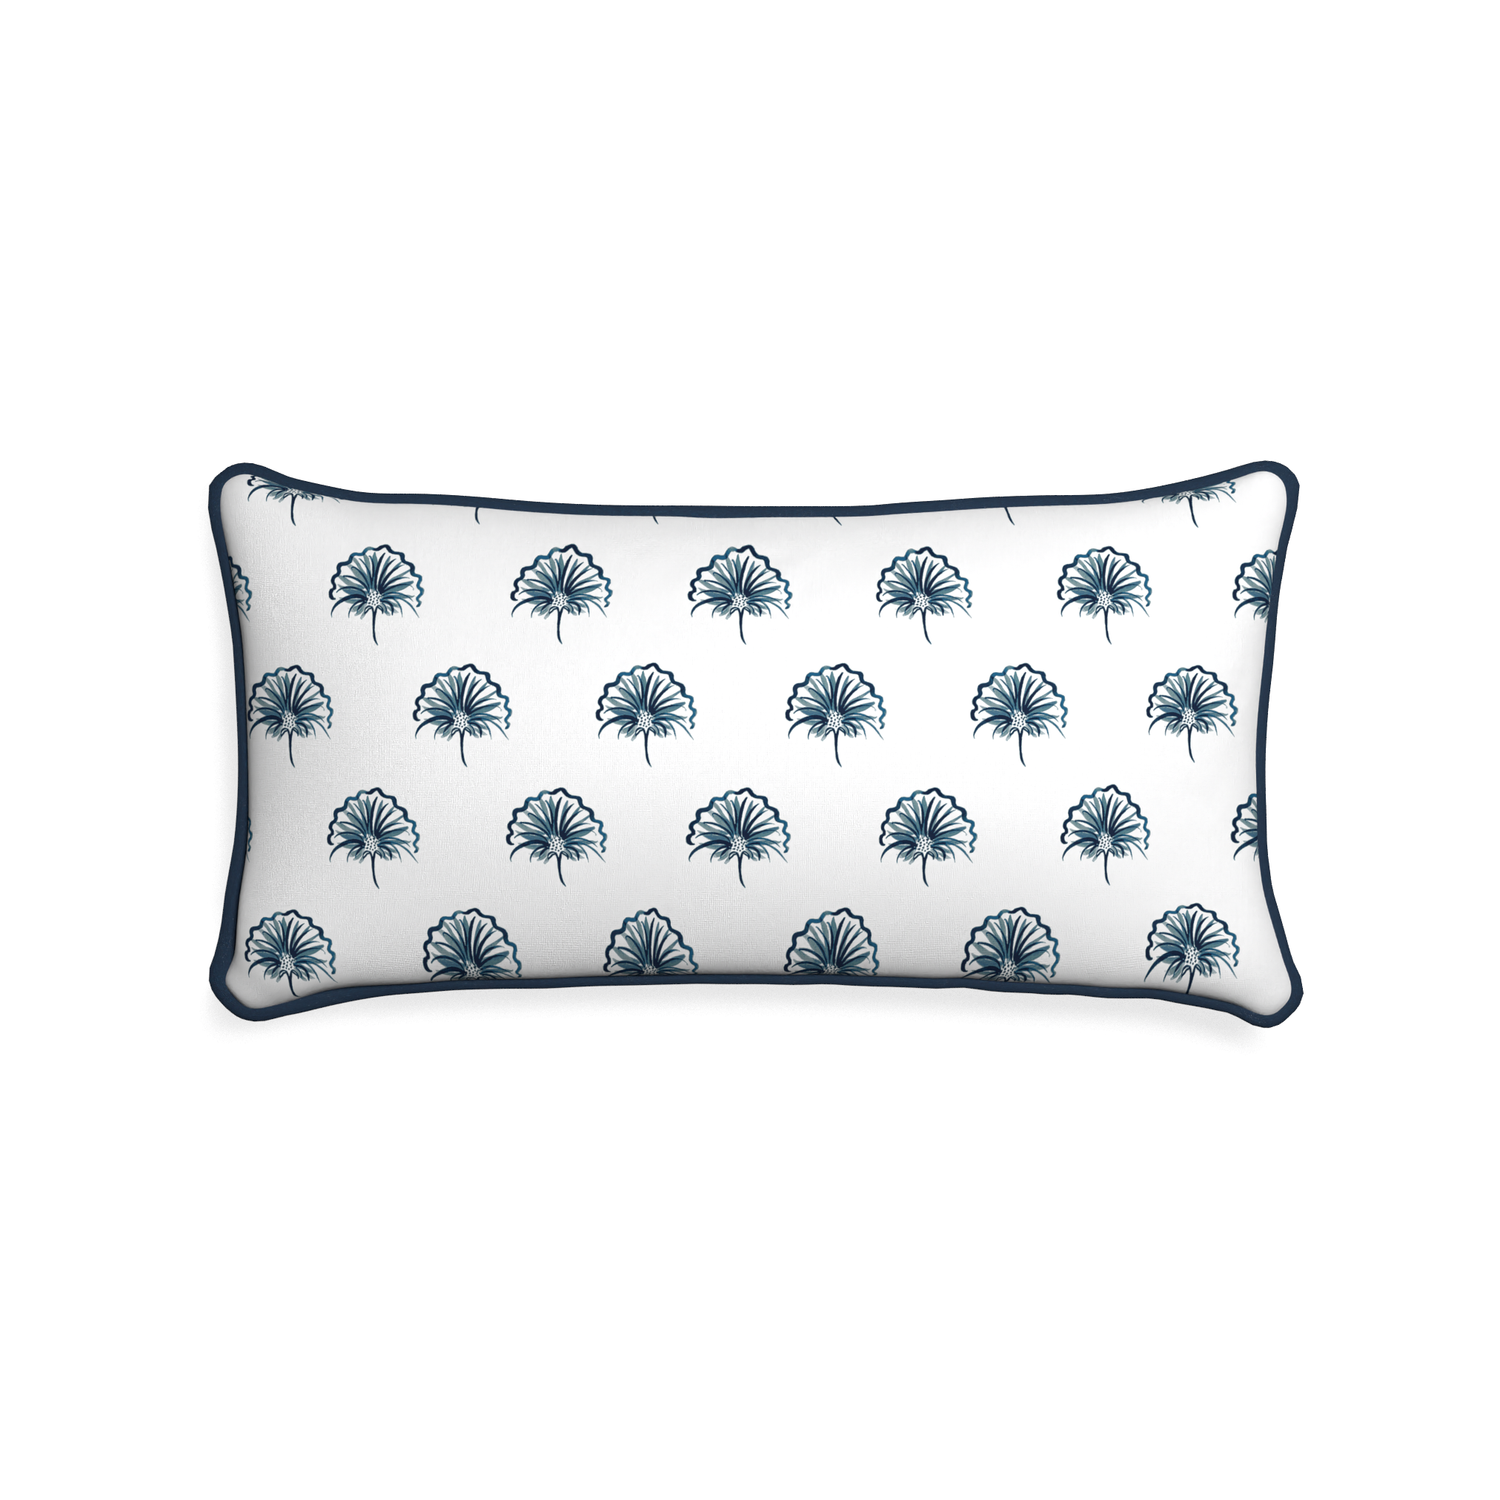 Midi-lumbar penelope midnight custom floral navypillow with c piping on white background